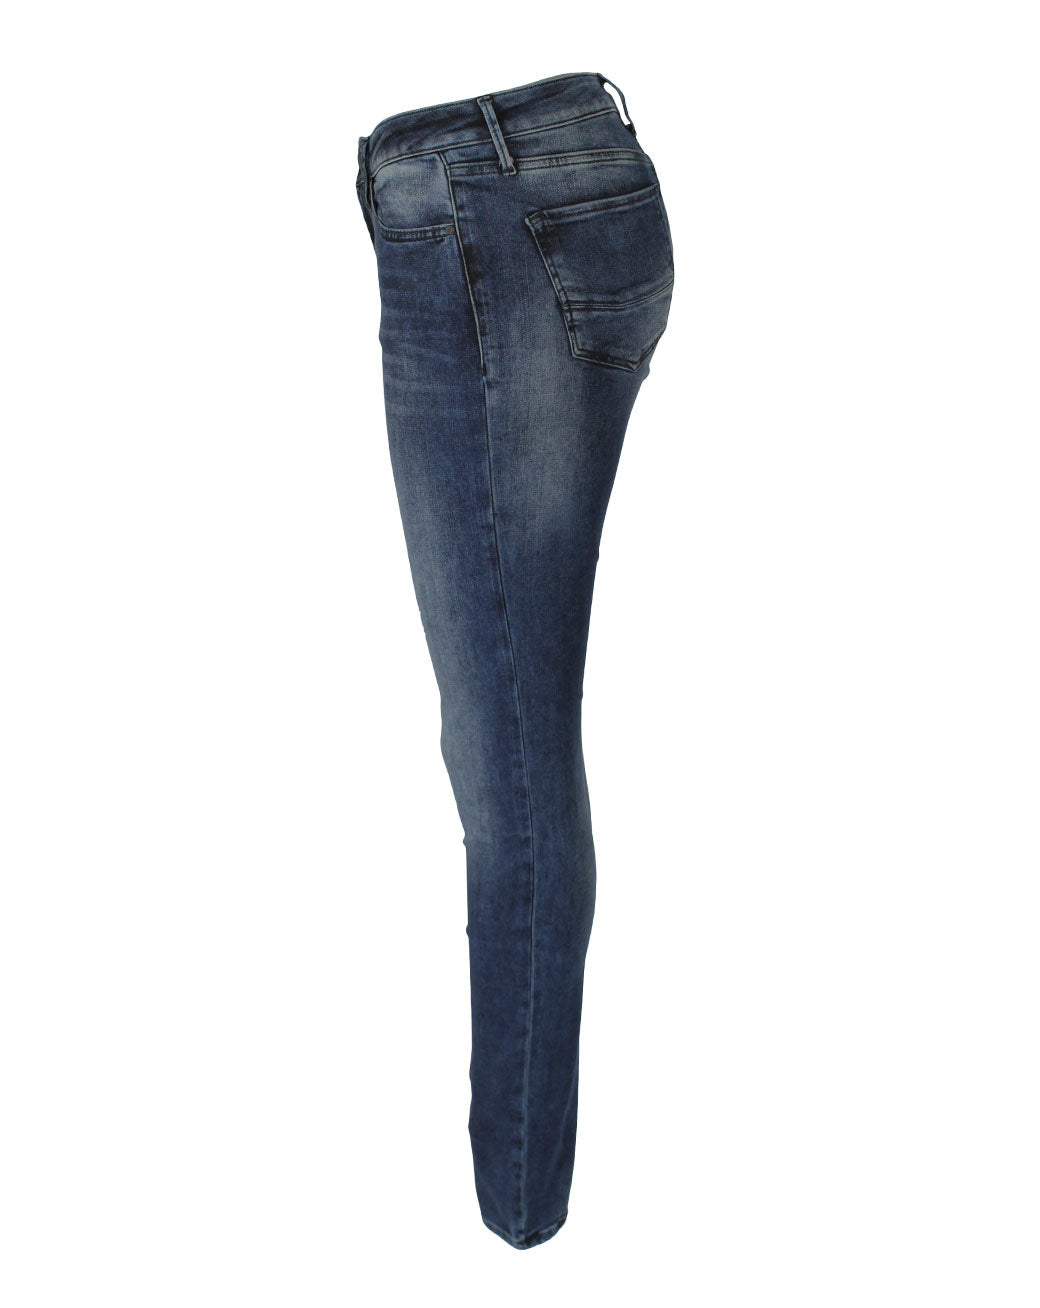 clothing tall women cross jeans alan dark blue washed